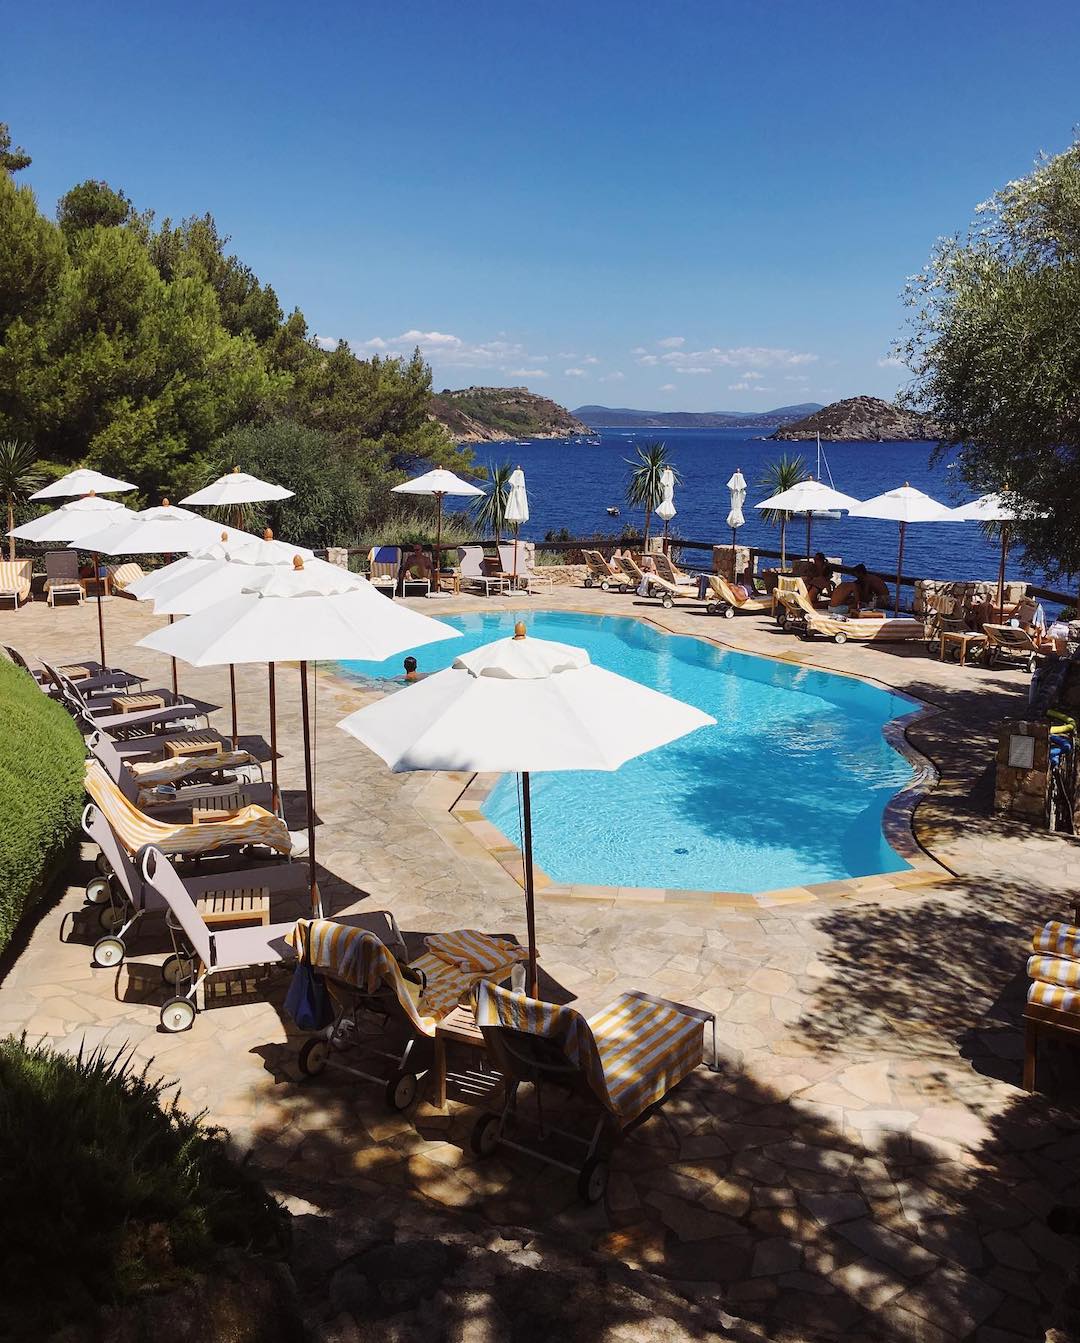 Salt-water pool area to relax at the Hotel Il Pellicano in Tuscany